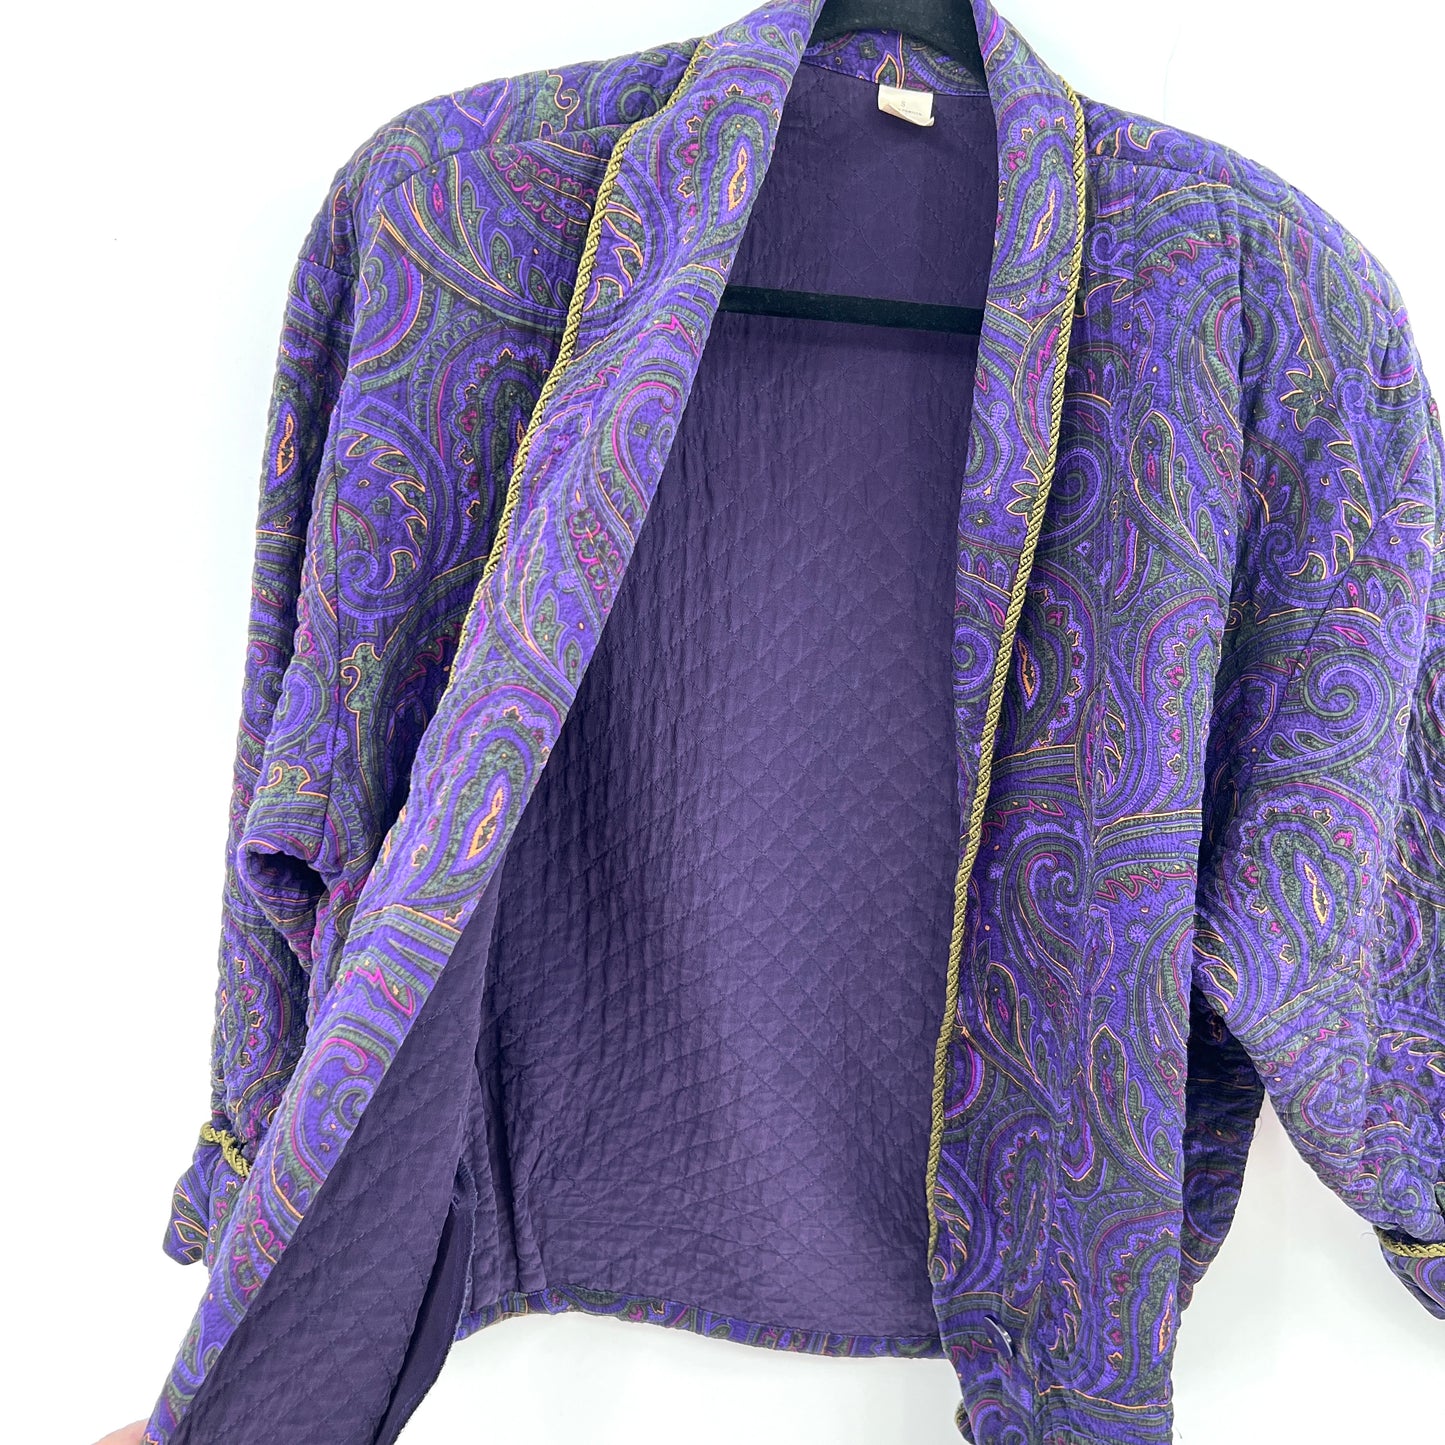 SOLD - Vintage Paisley Quilted Light Jacket S